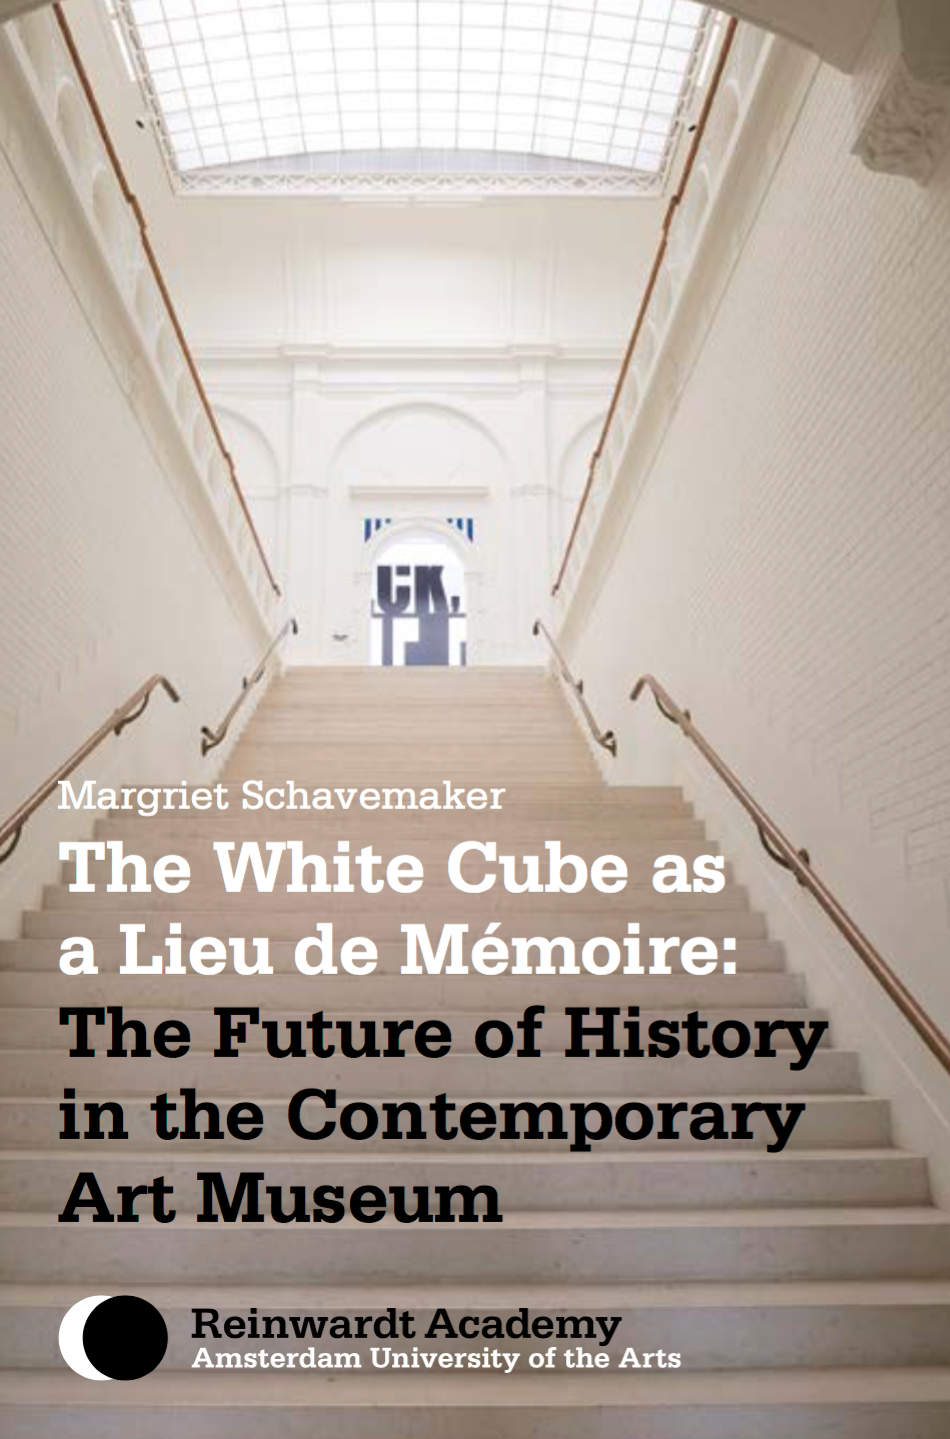 The White Cube as 'Lieu de Mémoire': The Future of History in the Contemporary Art Museum